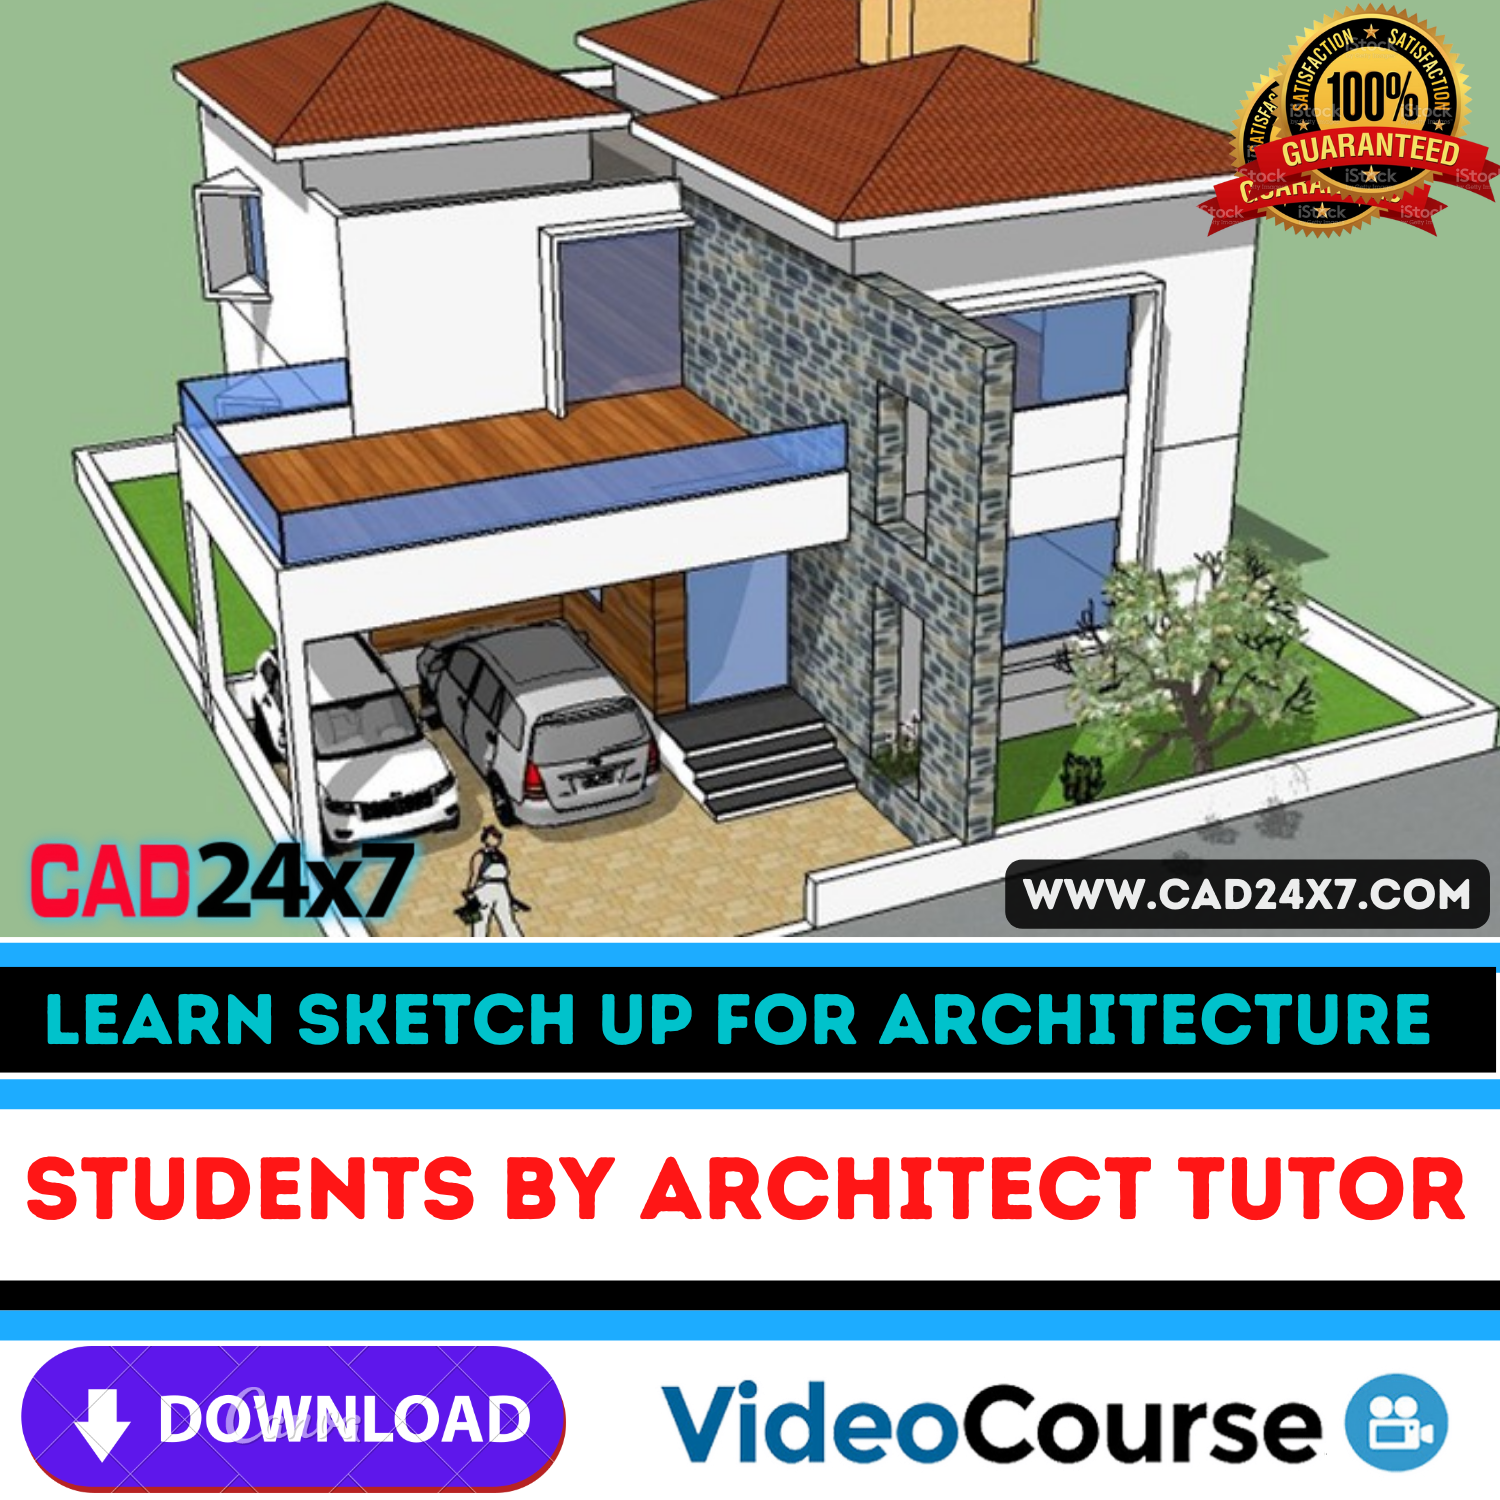 Learn Sketch Up for Architecture Students by Architect Tutor